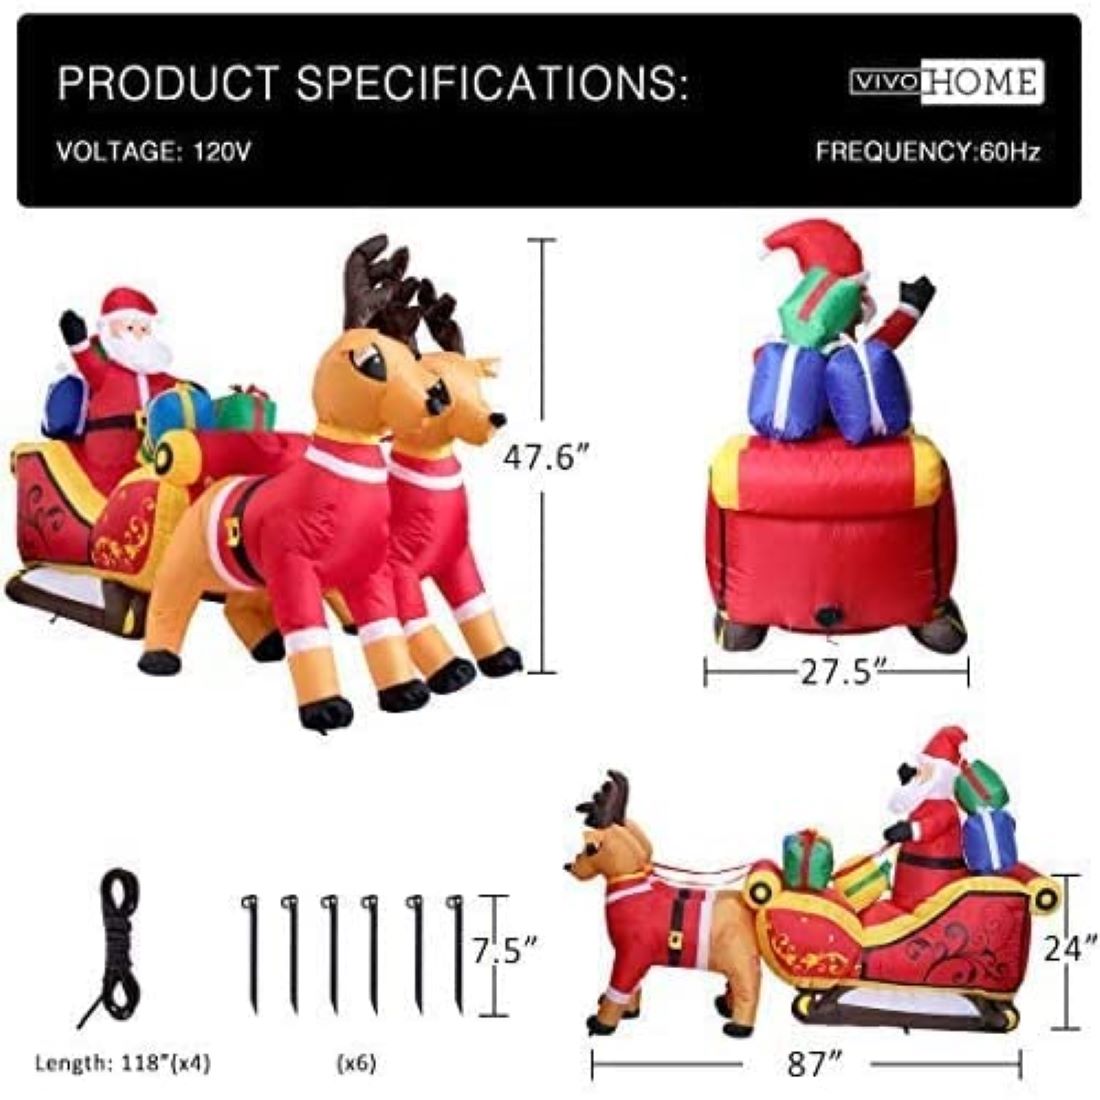 VIVOHOME 7.2ft Long Christmas Inflatable LED Lighted Santa on Sleigh with Reindeers and Gift Boxes Blow up Outdoor Yard